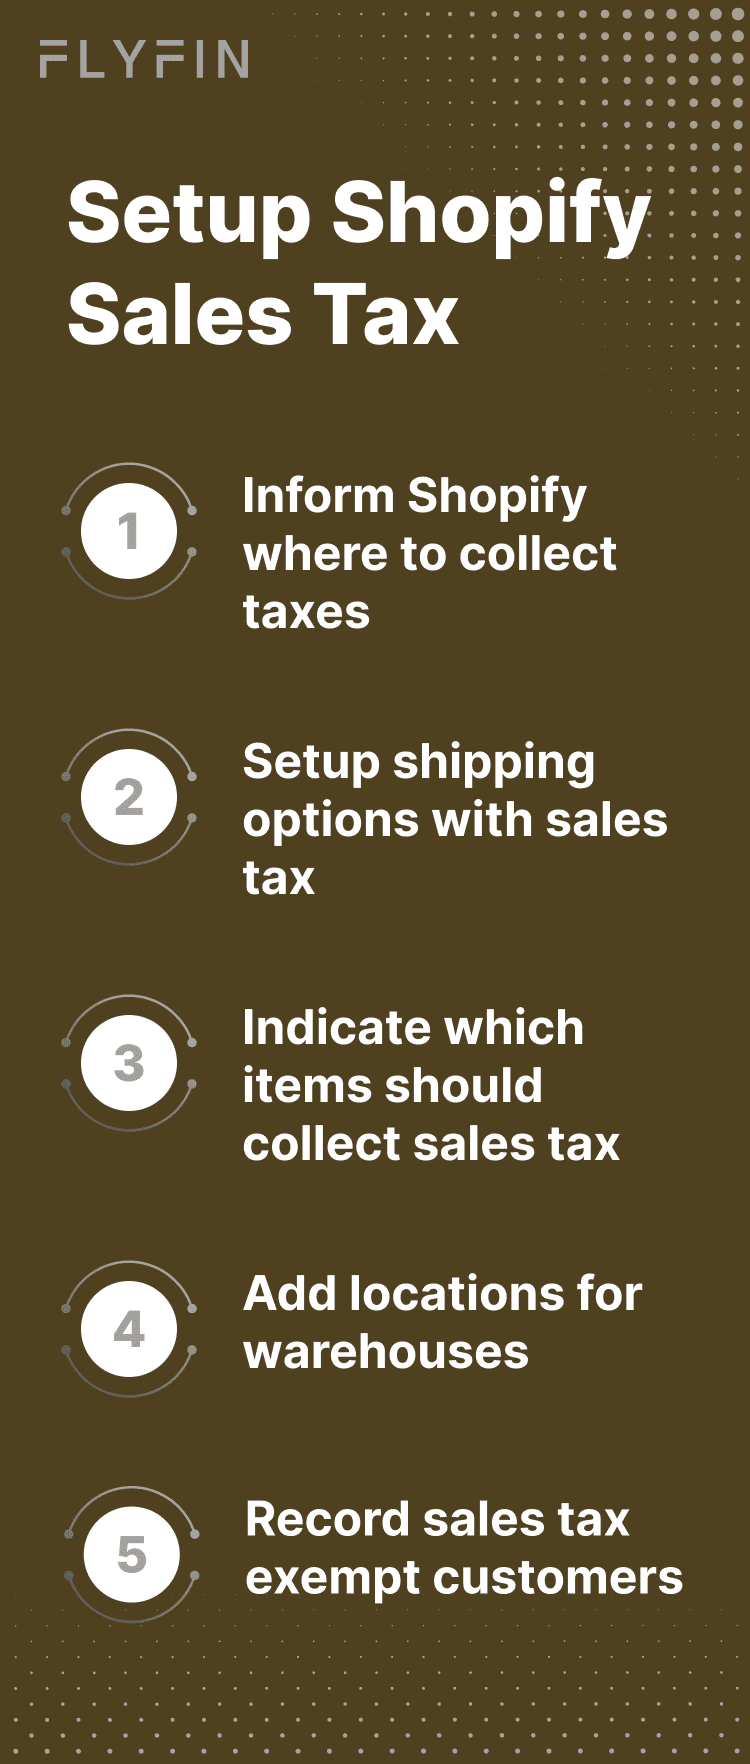 Image shows steps to set up sales tax on Shopify. Includes informing Shopify where to collect taxes, setting up shipping options with sales tax, adding warehouse locations, indicating taxable items, and recording tax-exempt customers.